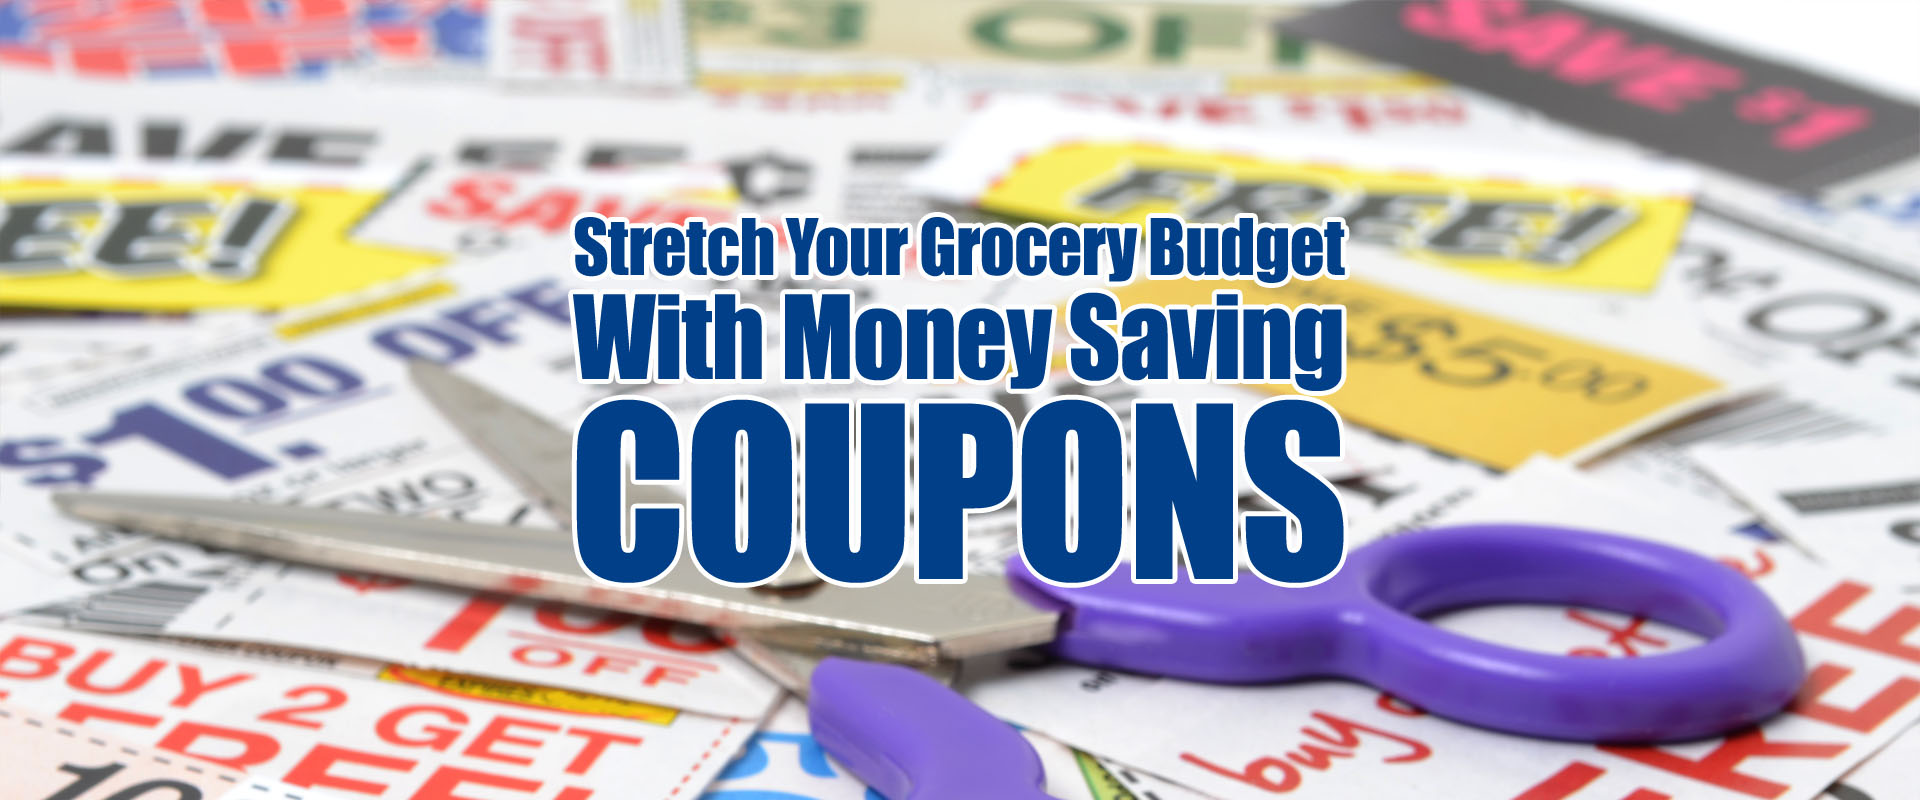 Stretch Your Grocery Budget with Money Saving Coupons